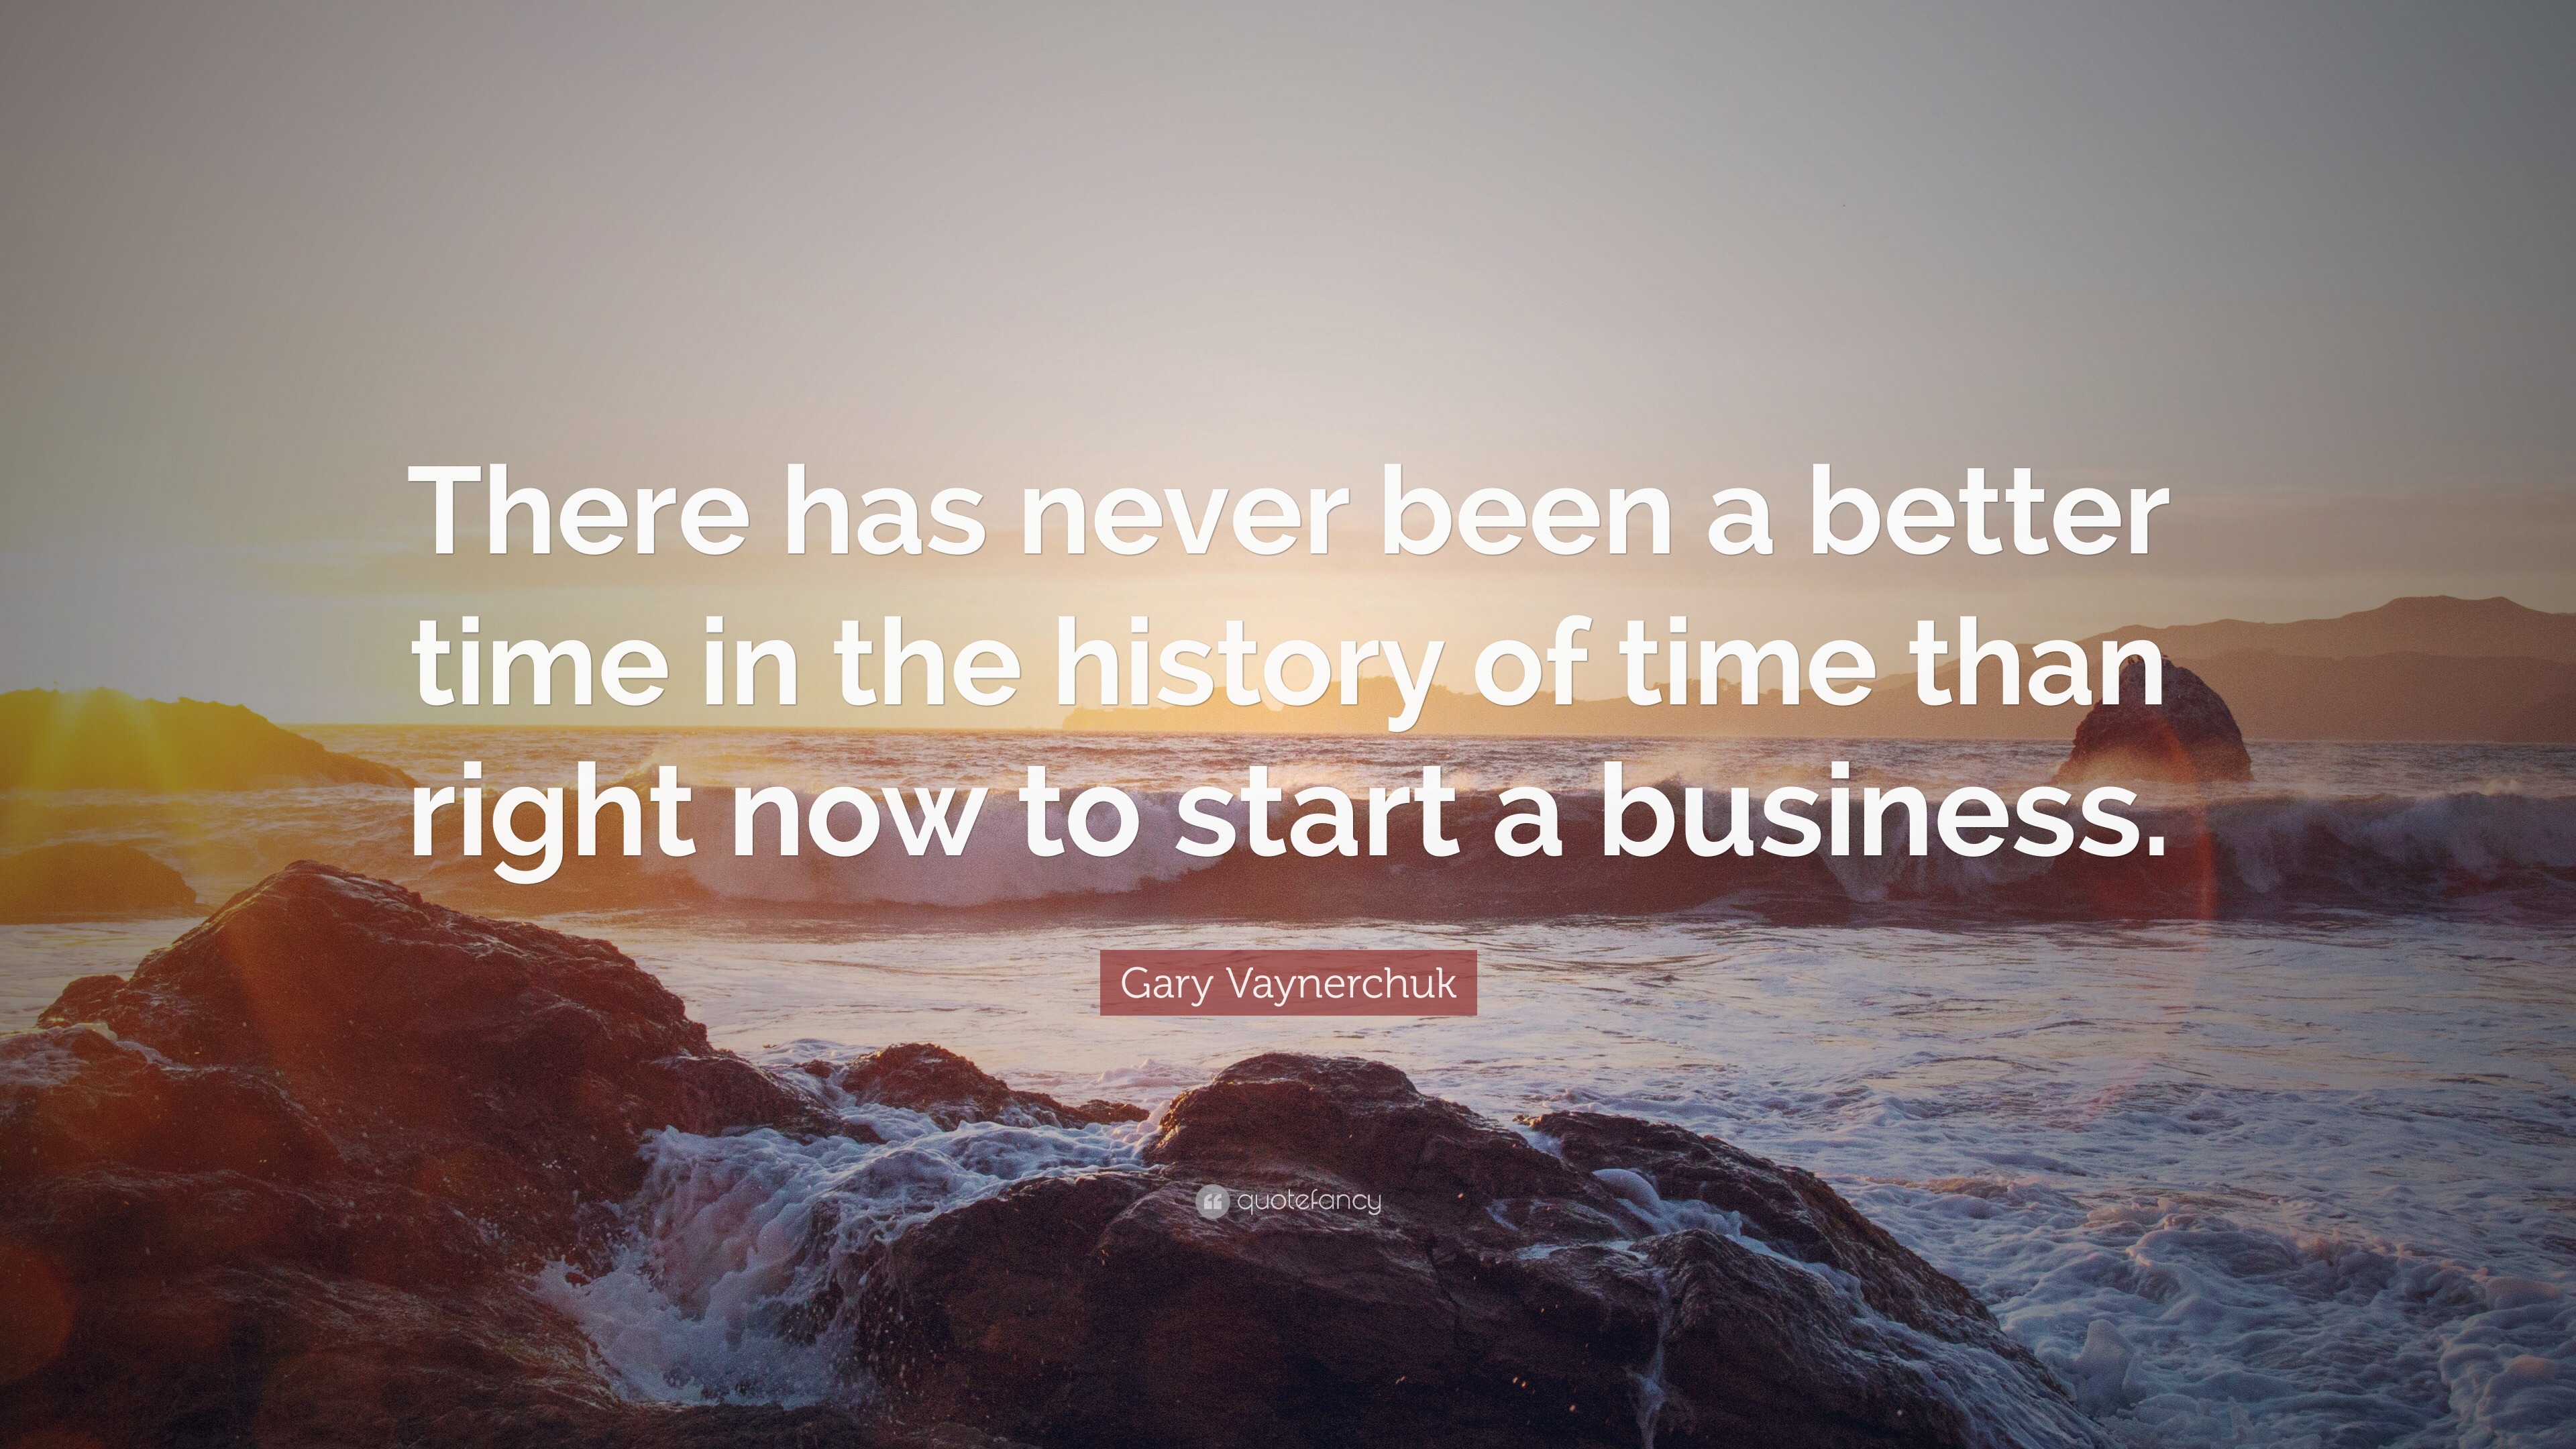 Perth heroin Besætte Gary Vaynerchuk Quote: “There has never been a better time in the history  of time than